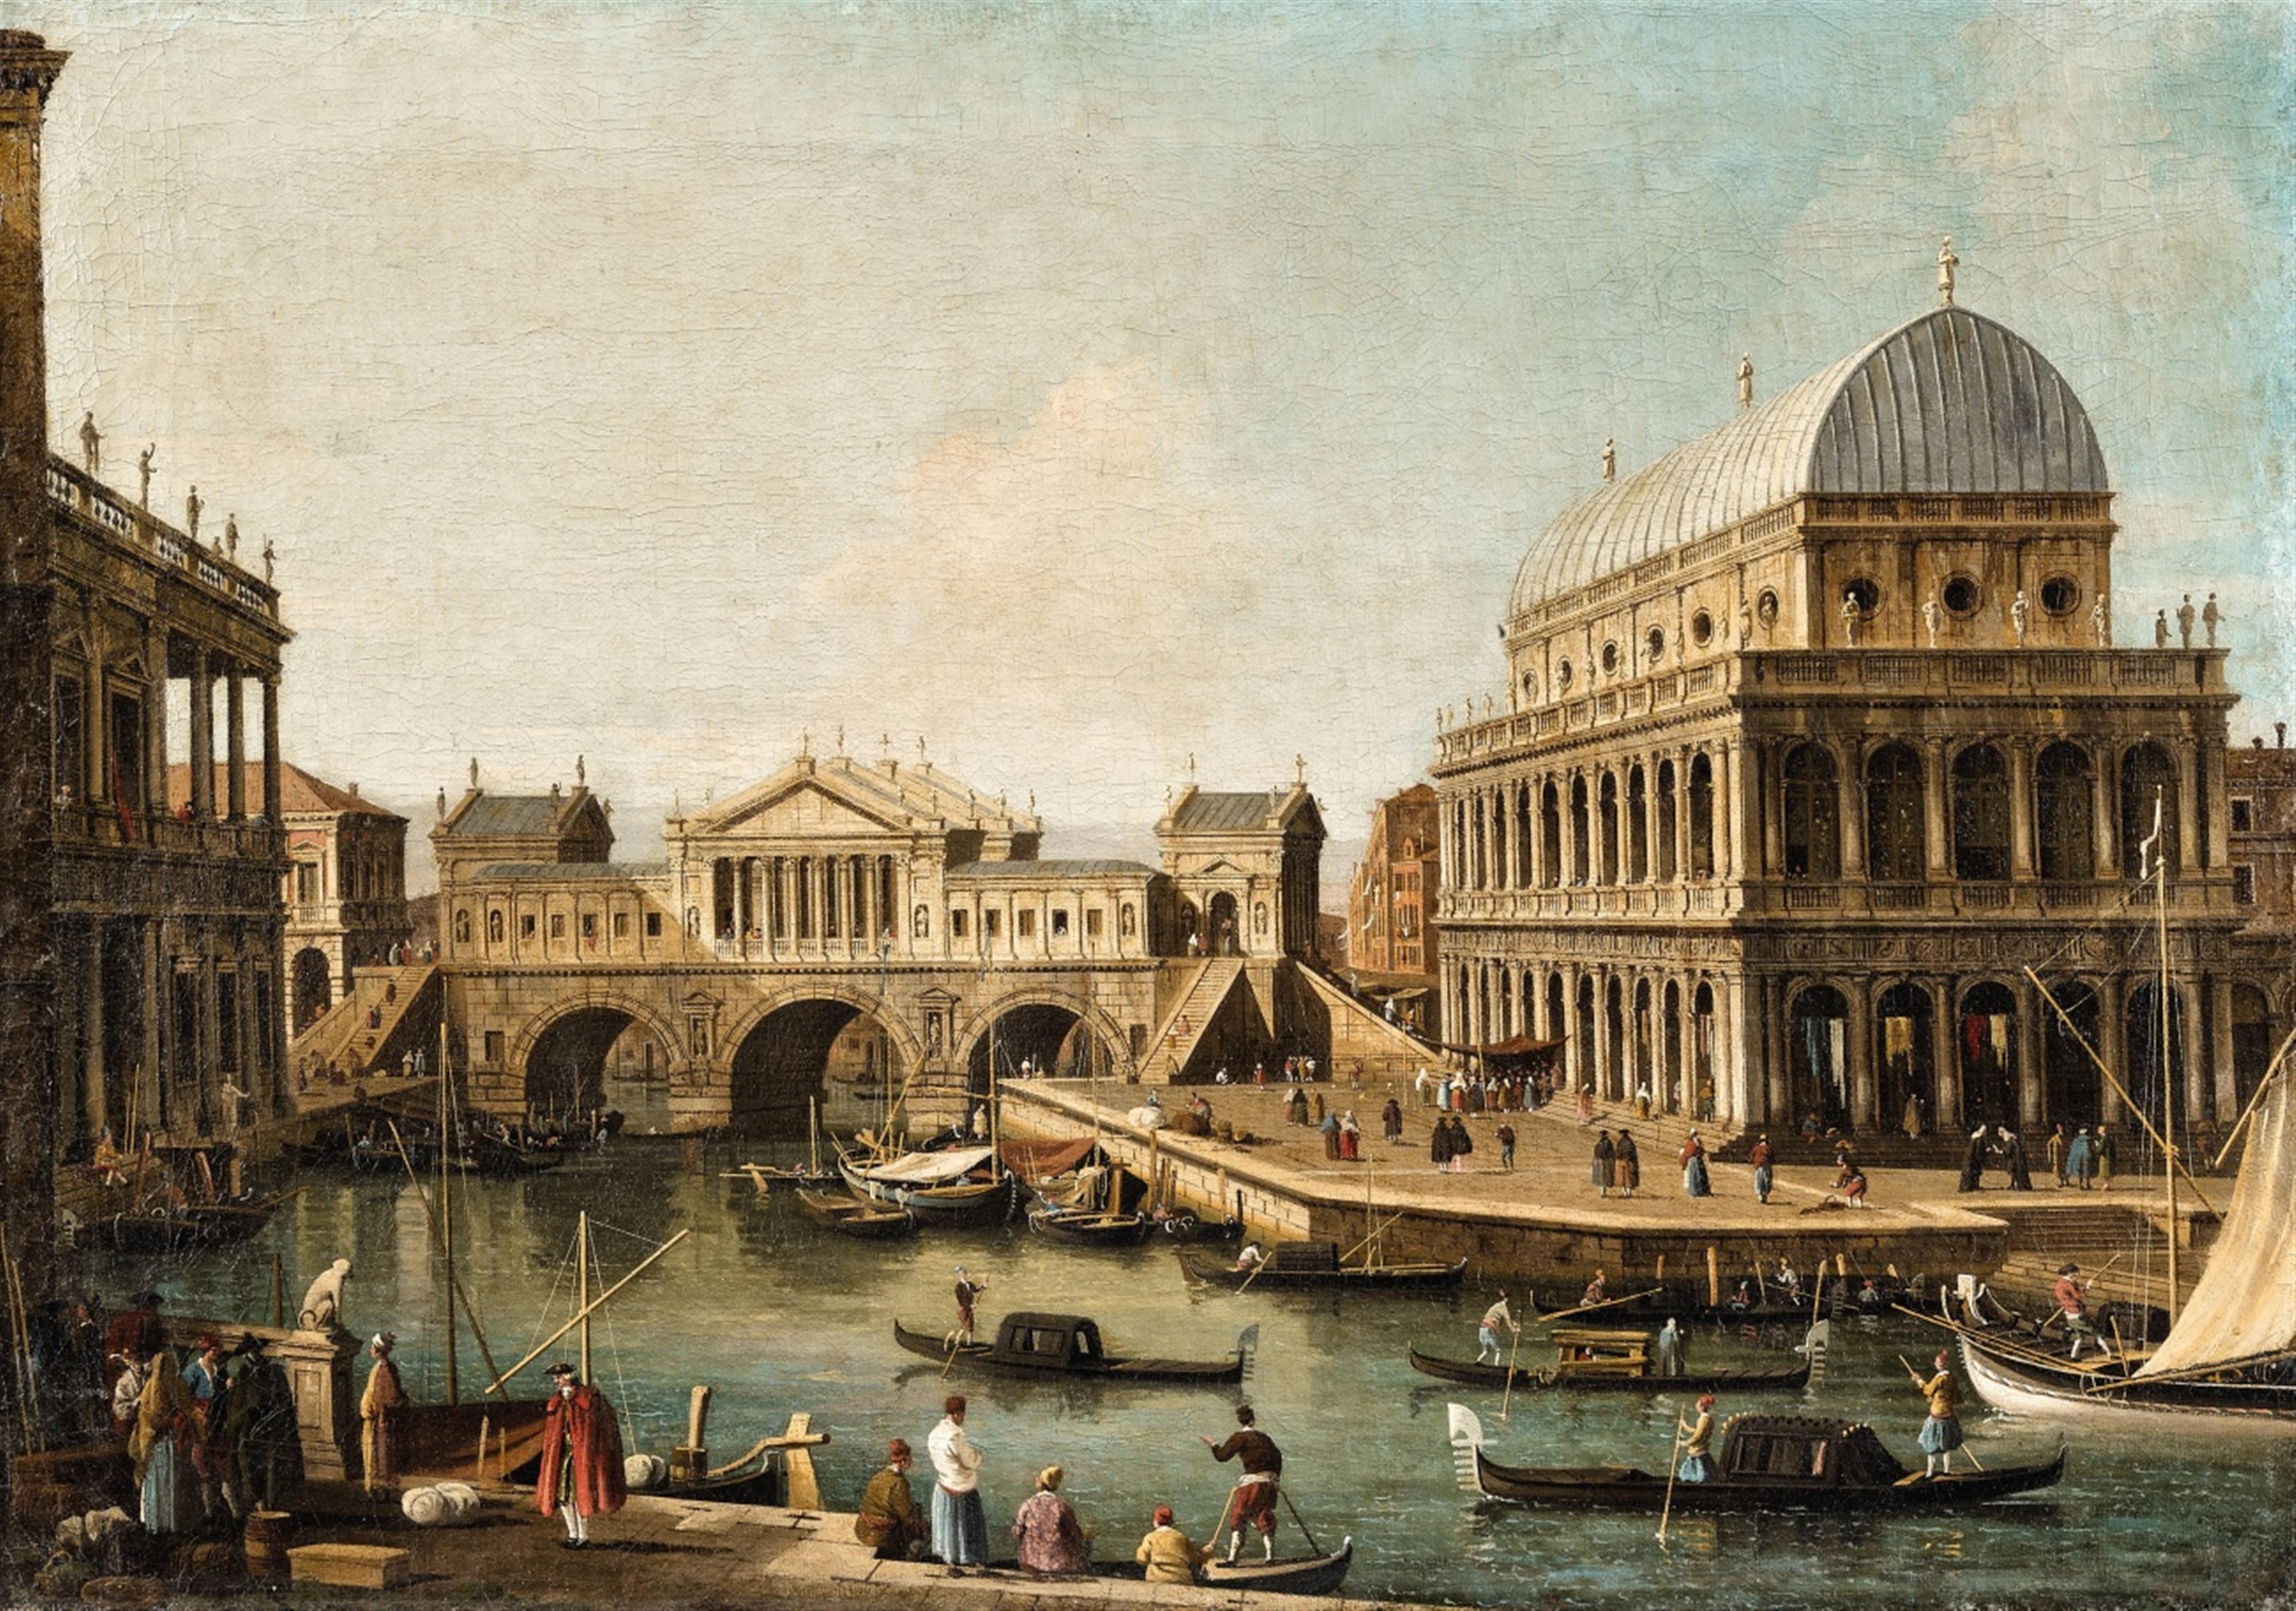 Antonio Canal, called Canaletto, copy after - An Architectural Capriccio with the Ponte di Rialto after a design by Palladio and Buildings in Vicenza - image-1